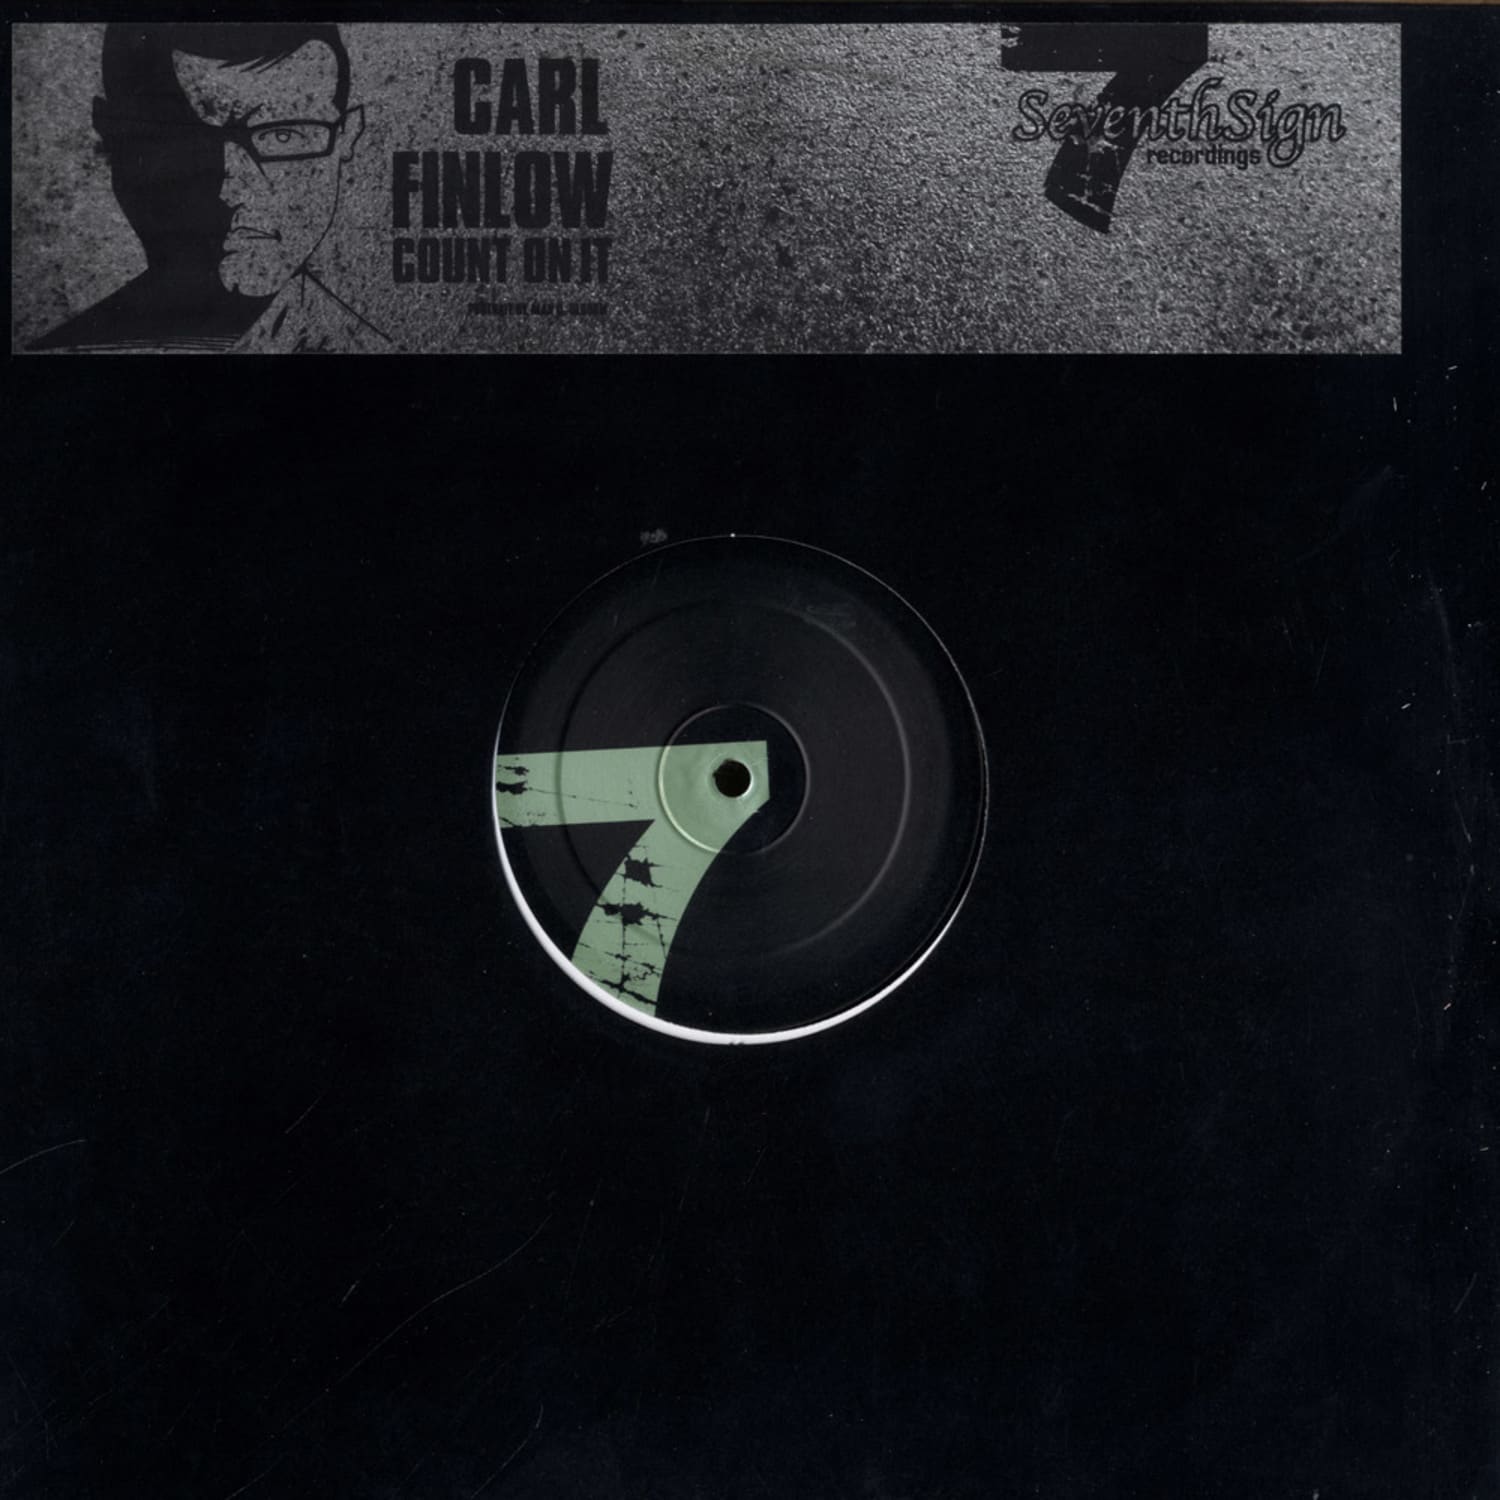 Carl Finlow - COUNT ON IT